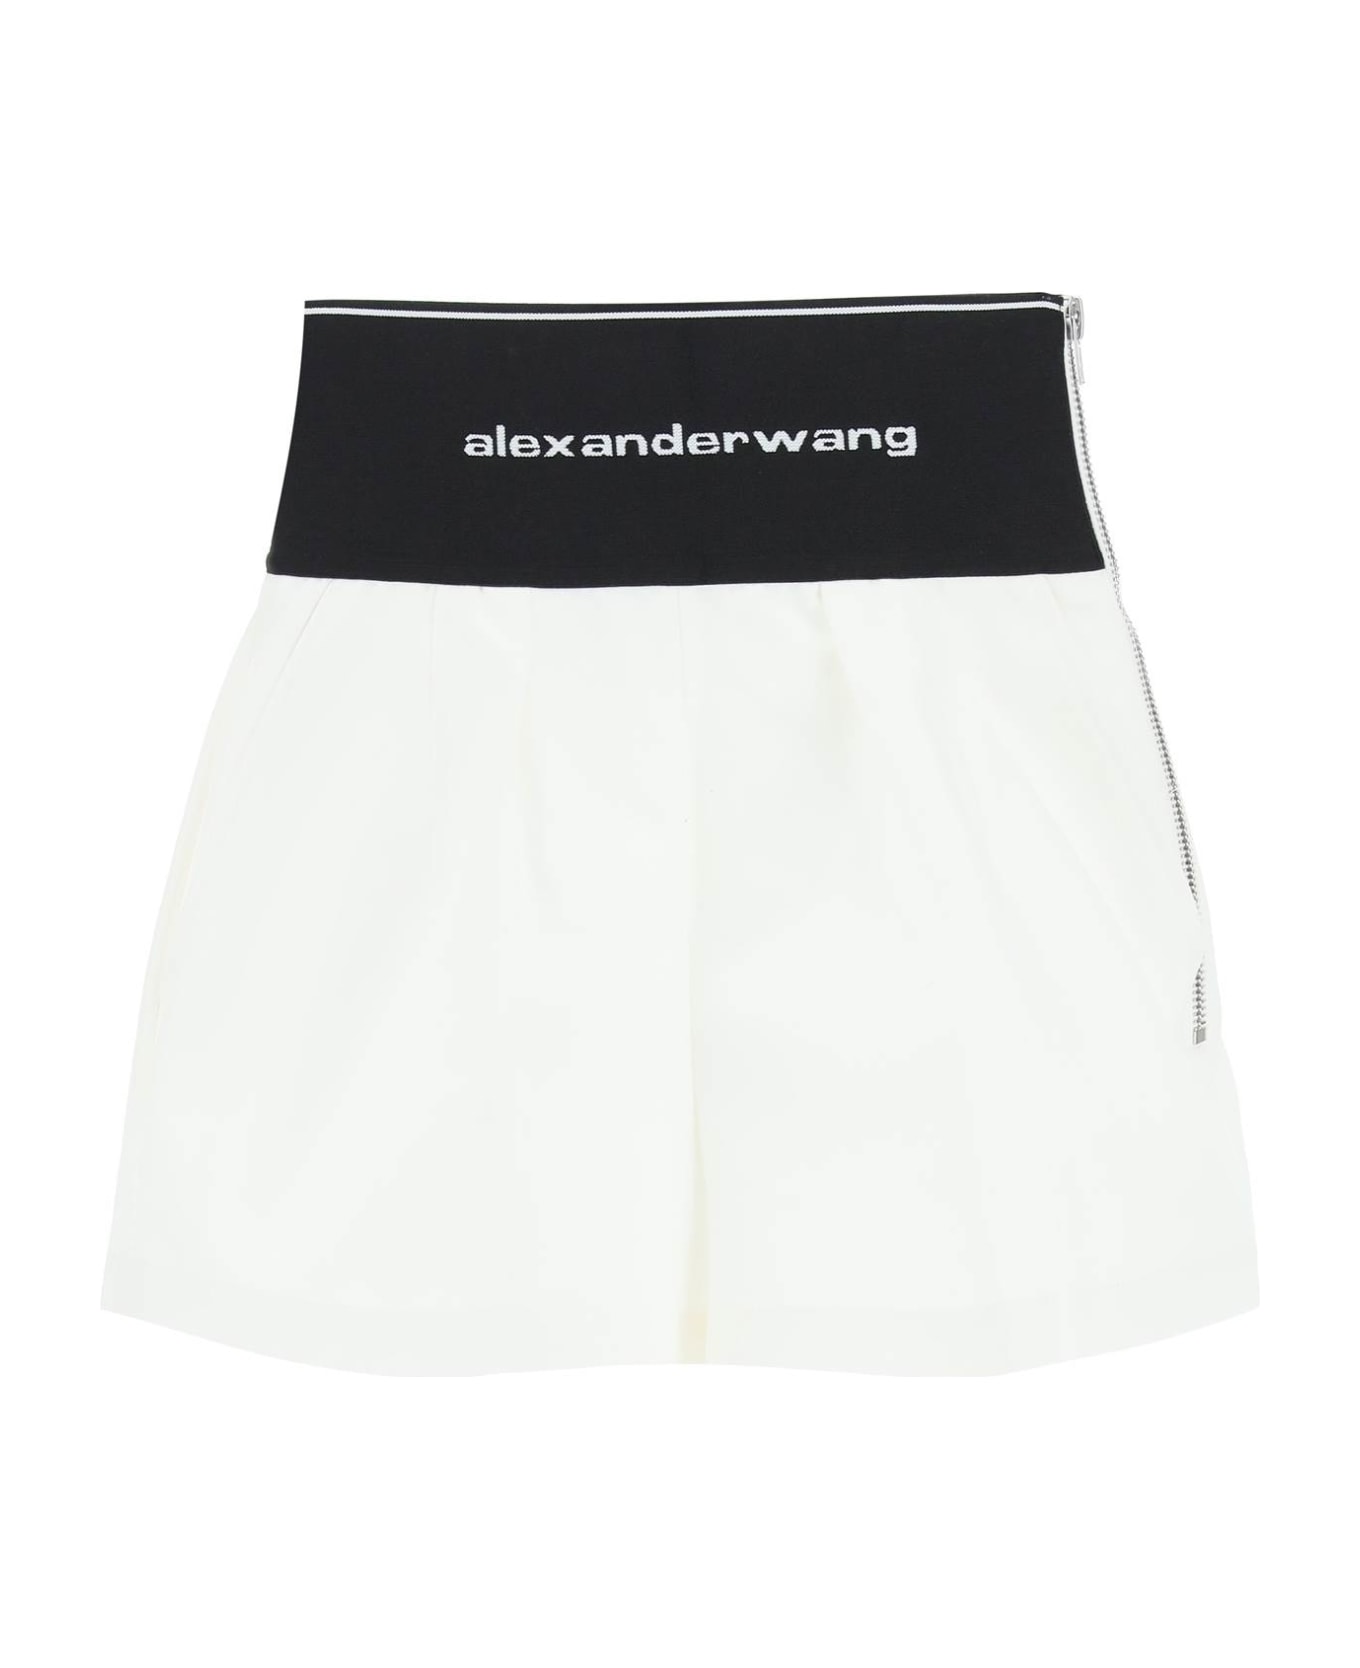 Alexander Wang Cotton And Nylon Shorts With Branded Waistband - SNOW WHITE (White) ショートパンツ